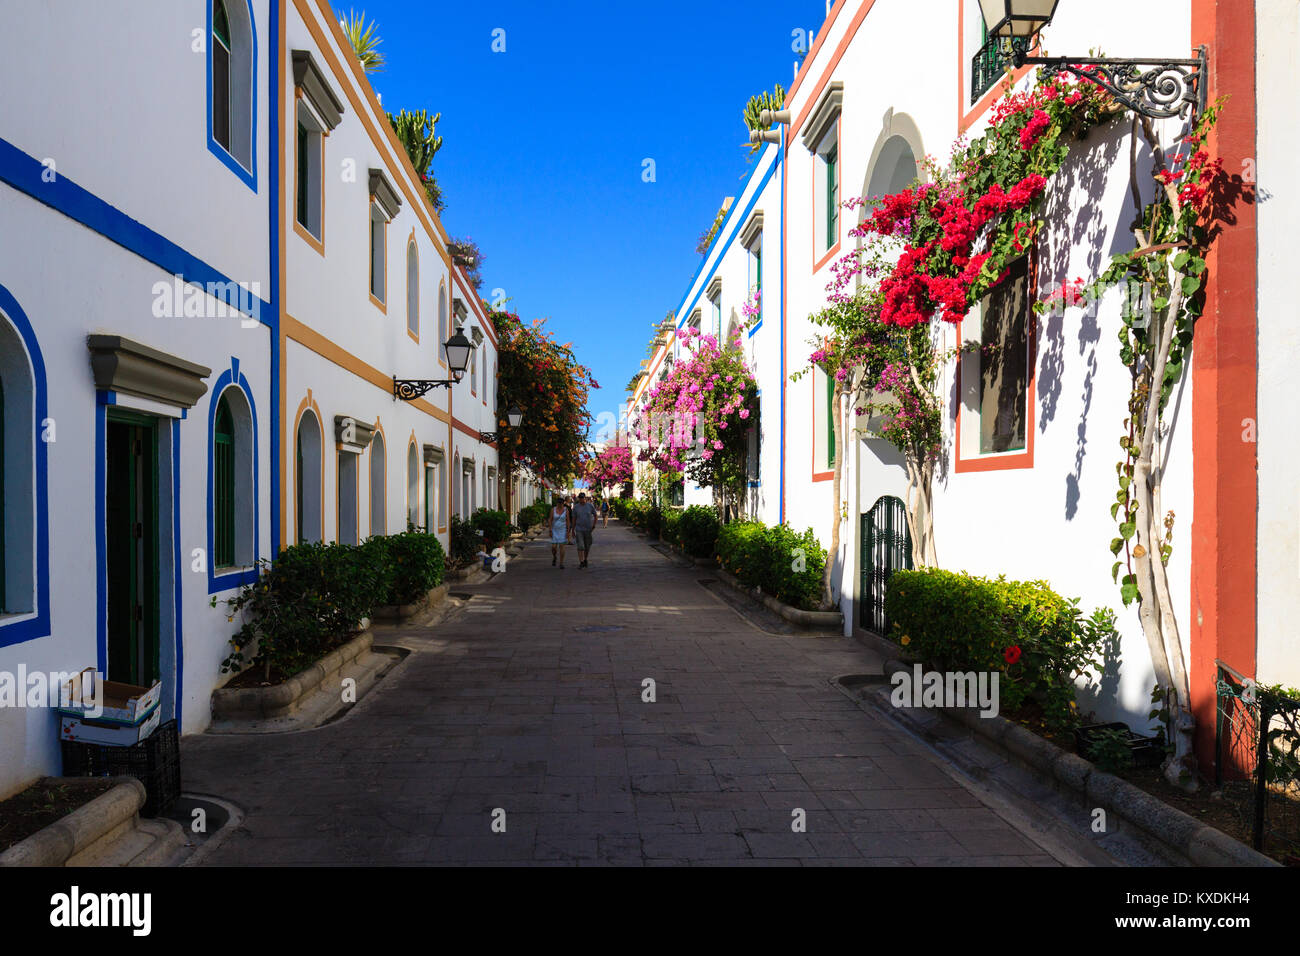 Wonderful alley with colorful flowers, doors and windows in Puerto De Mogan on Gran Canaria island. Stock Photo